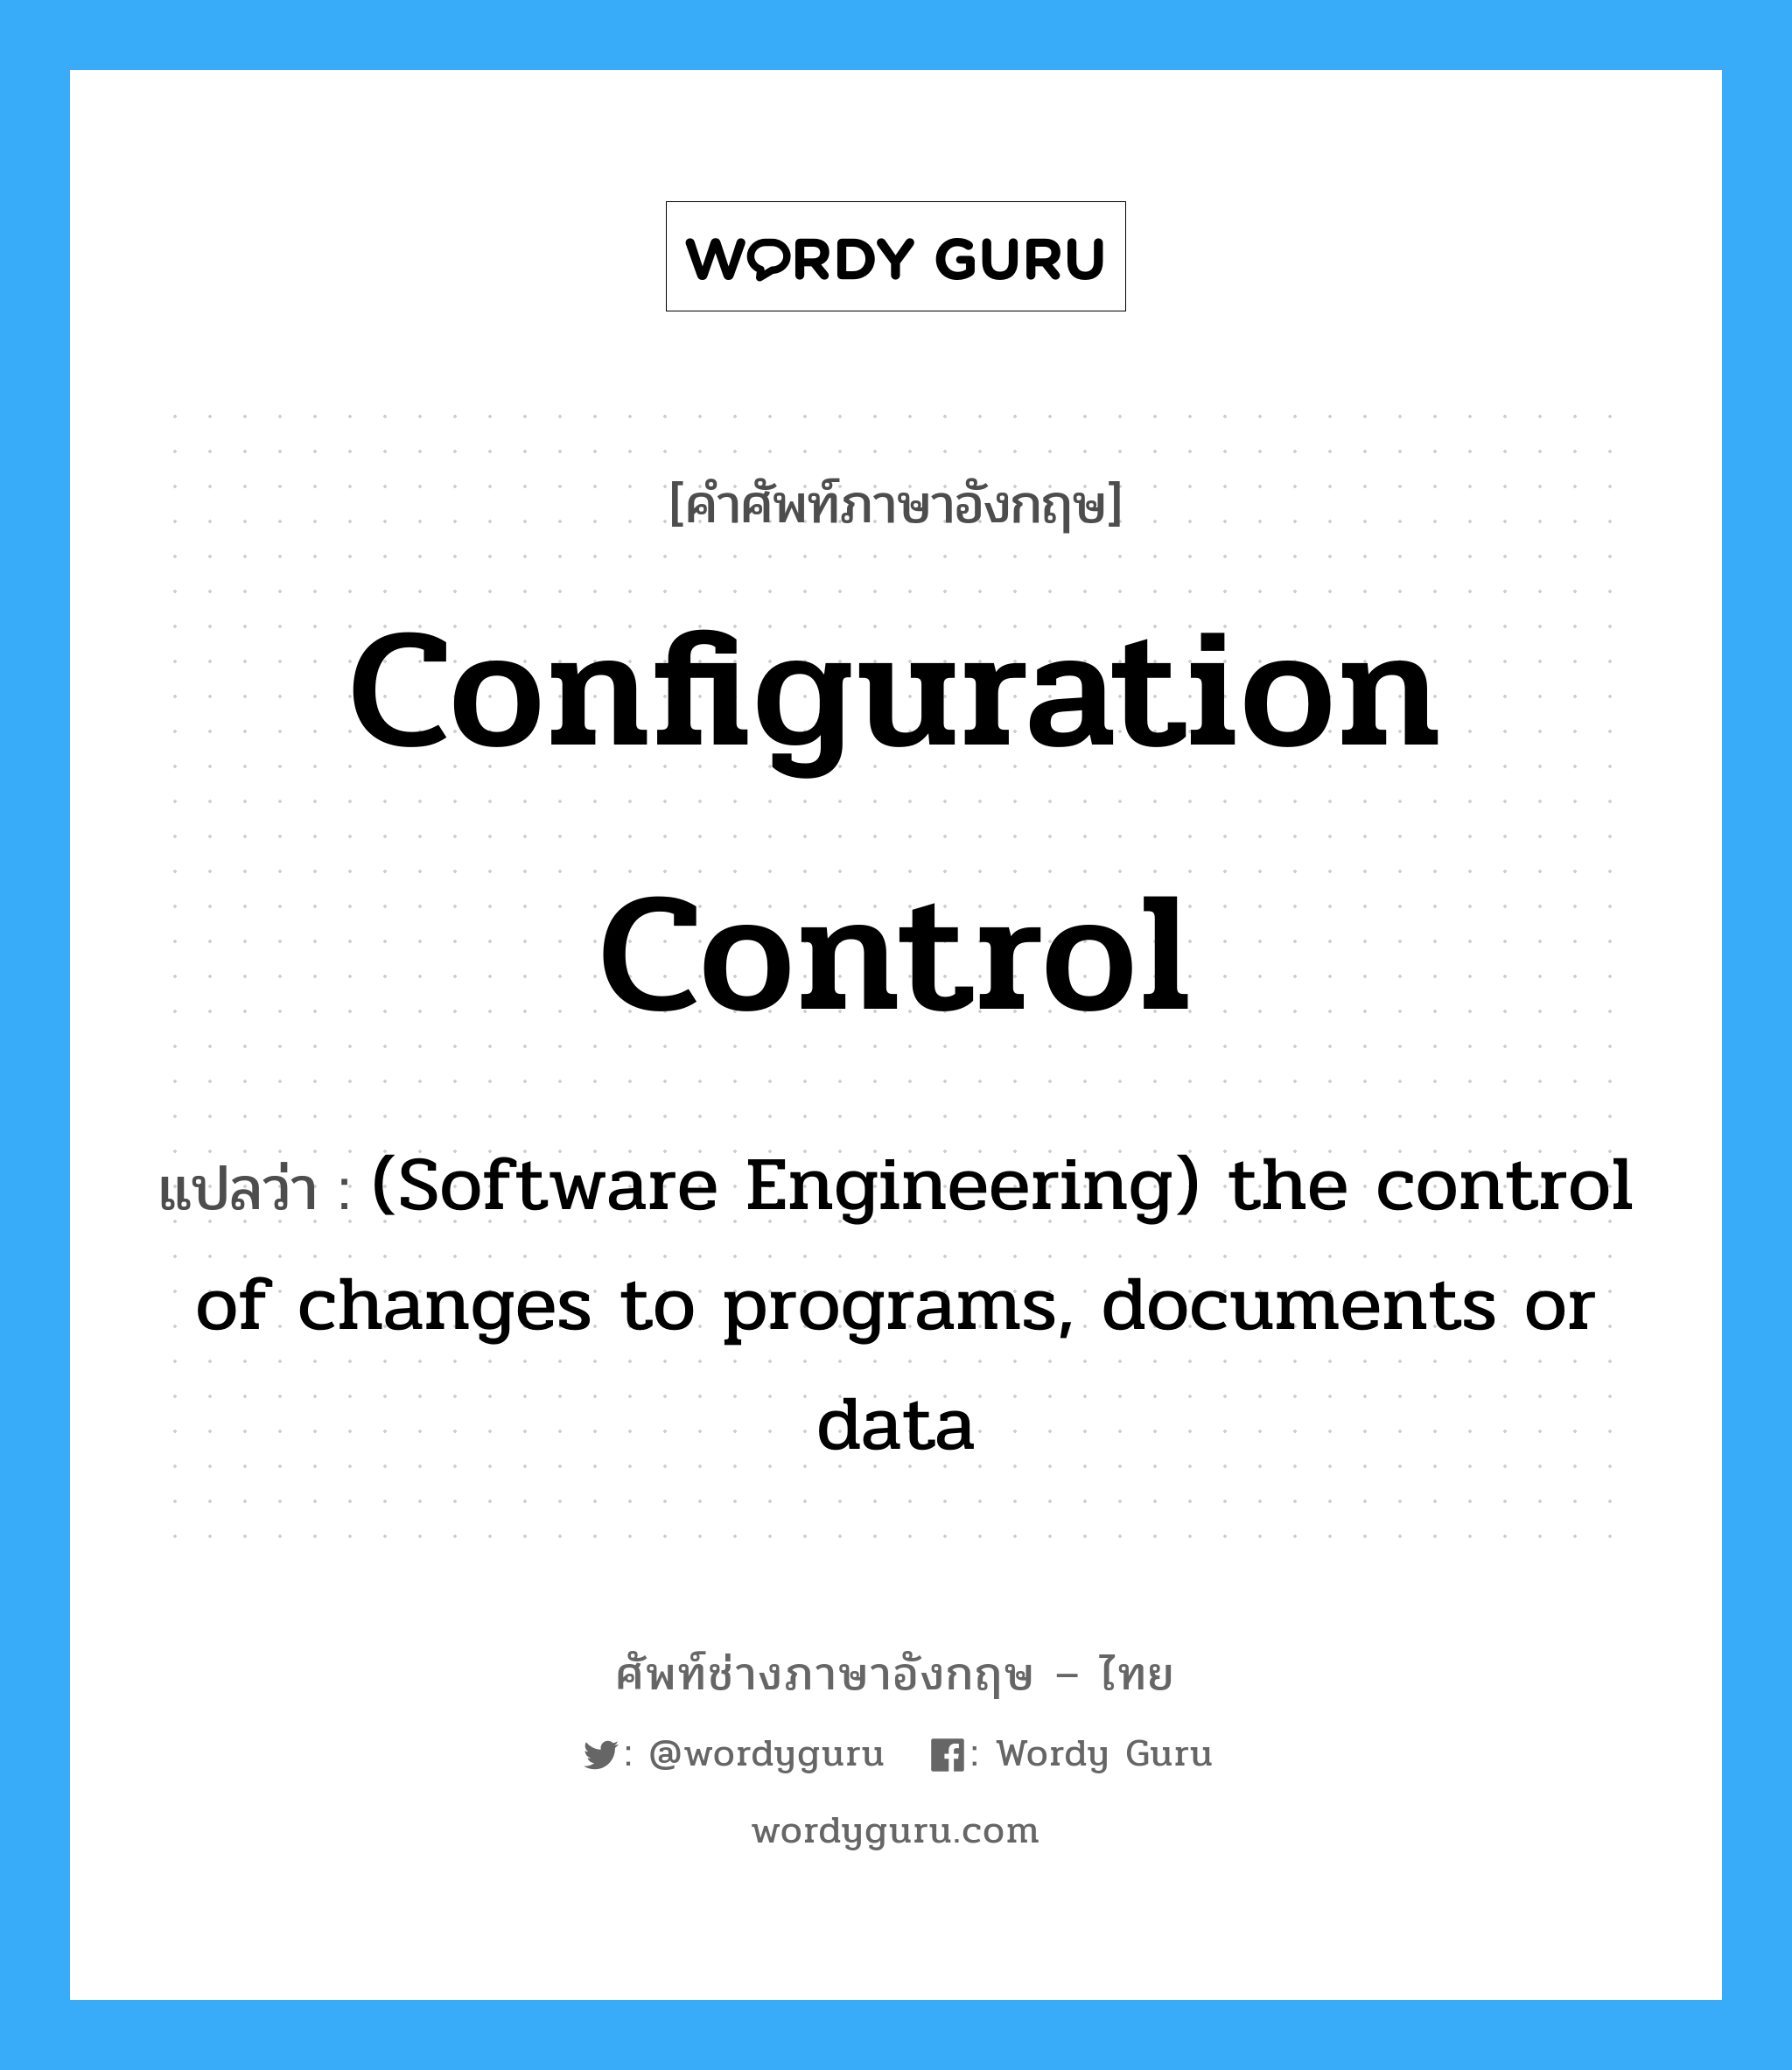 Configuration control แปลว่า?, คำศัพท์ช่างภาษาอังกฤษ - ไทย Configuration control คำศัพท์ภาษาอังกฤษ Configuration control แปลว่า (Software Engineering) the control of changes to programs, documents or data